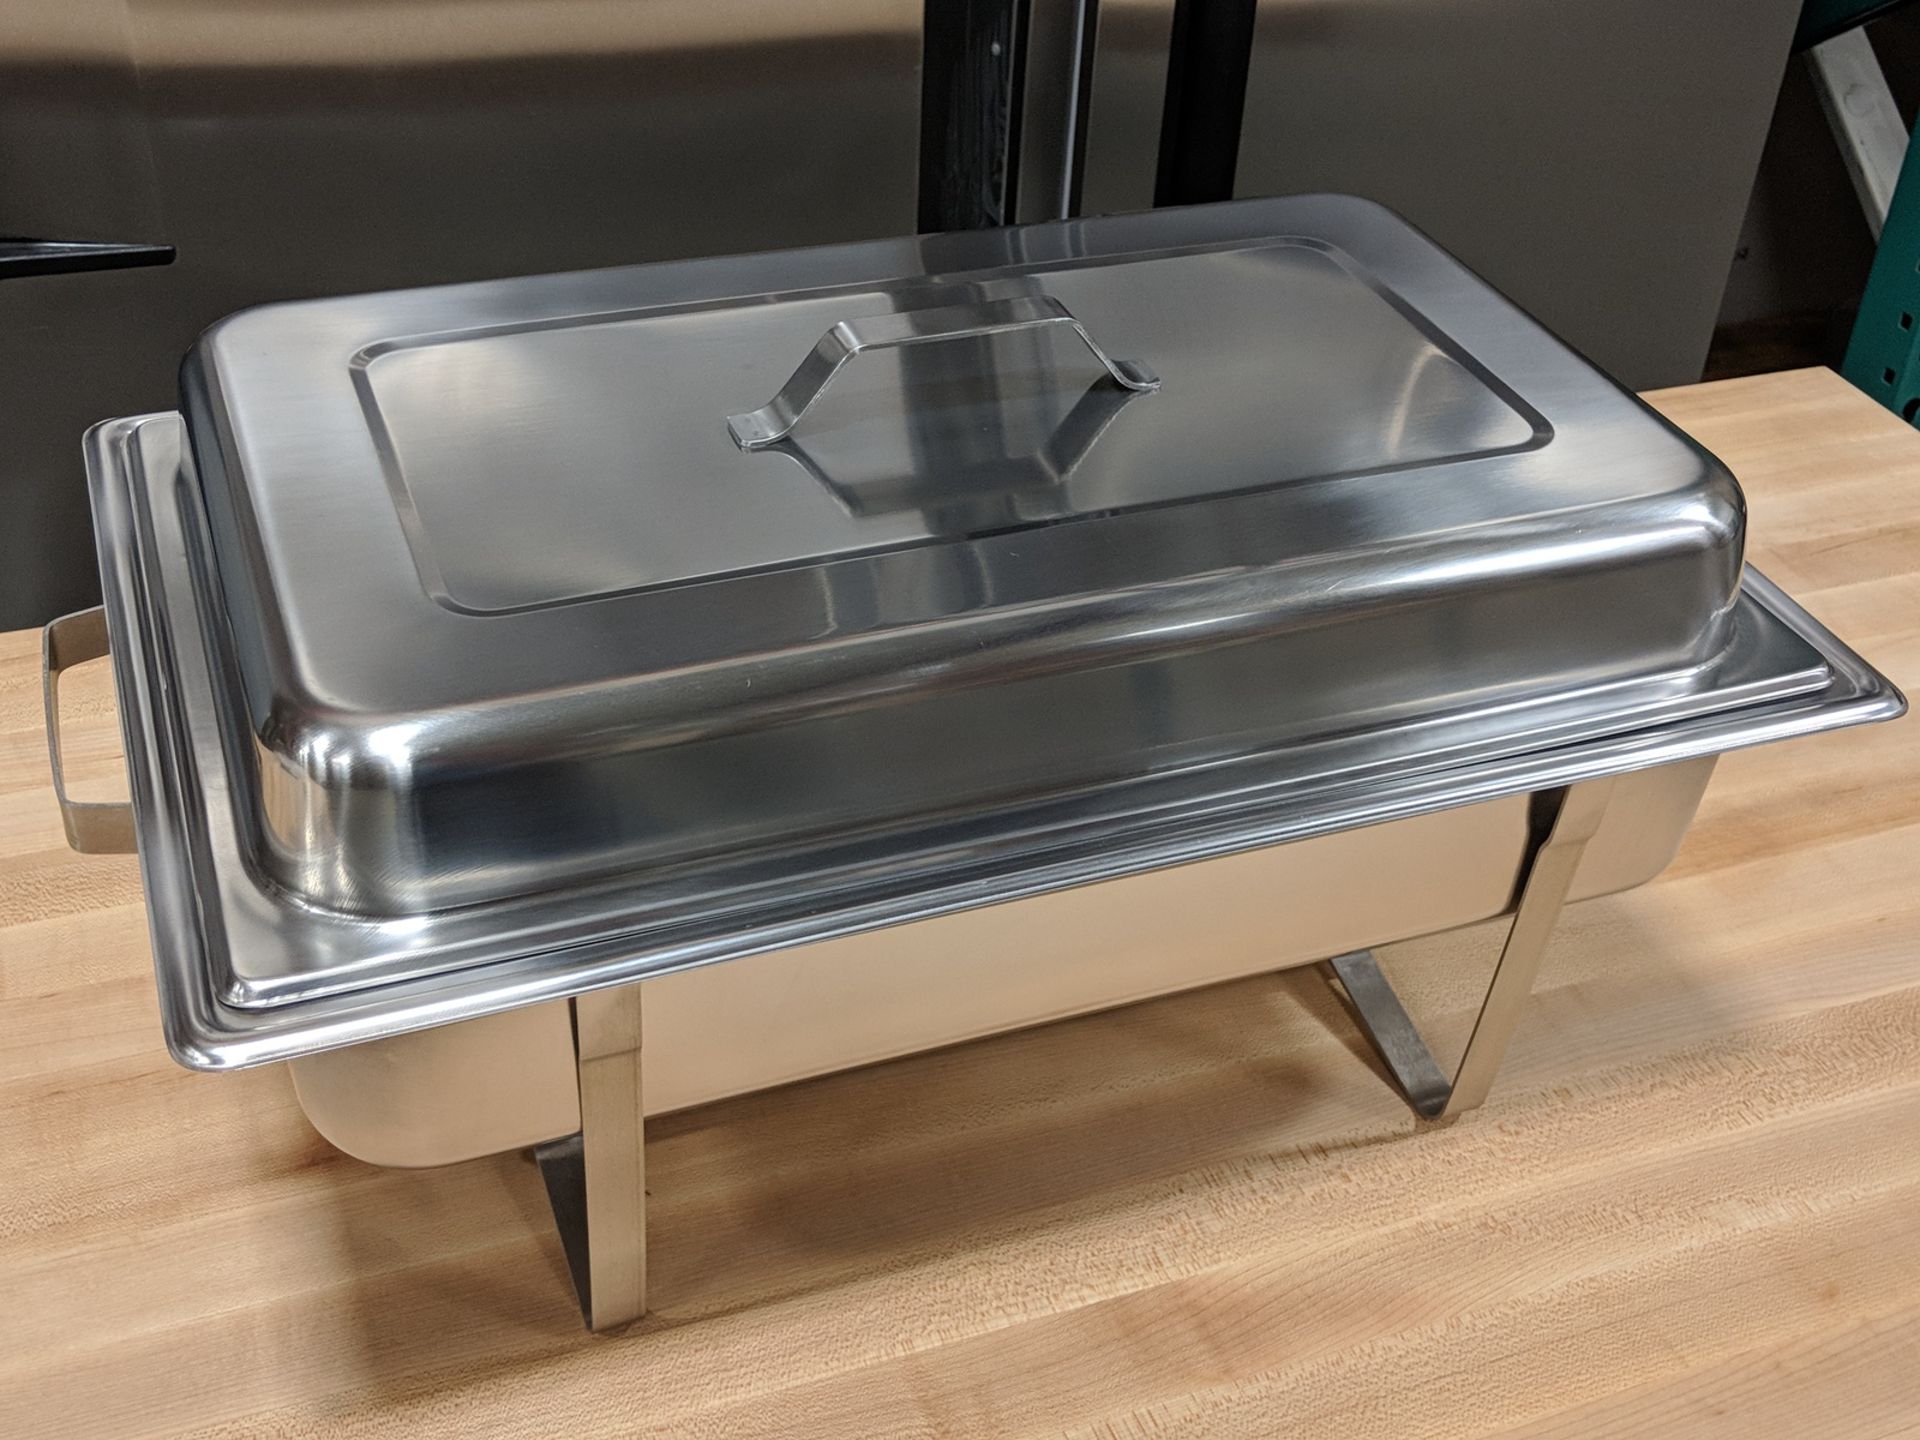 Full Size Chafer - Frame, Fuel Holder, Water Pan, 2.5" Insert and Lid, Update SCC-19 - Image 8 of 8